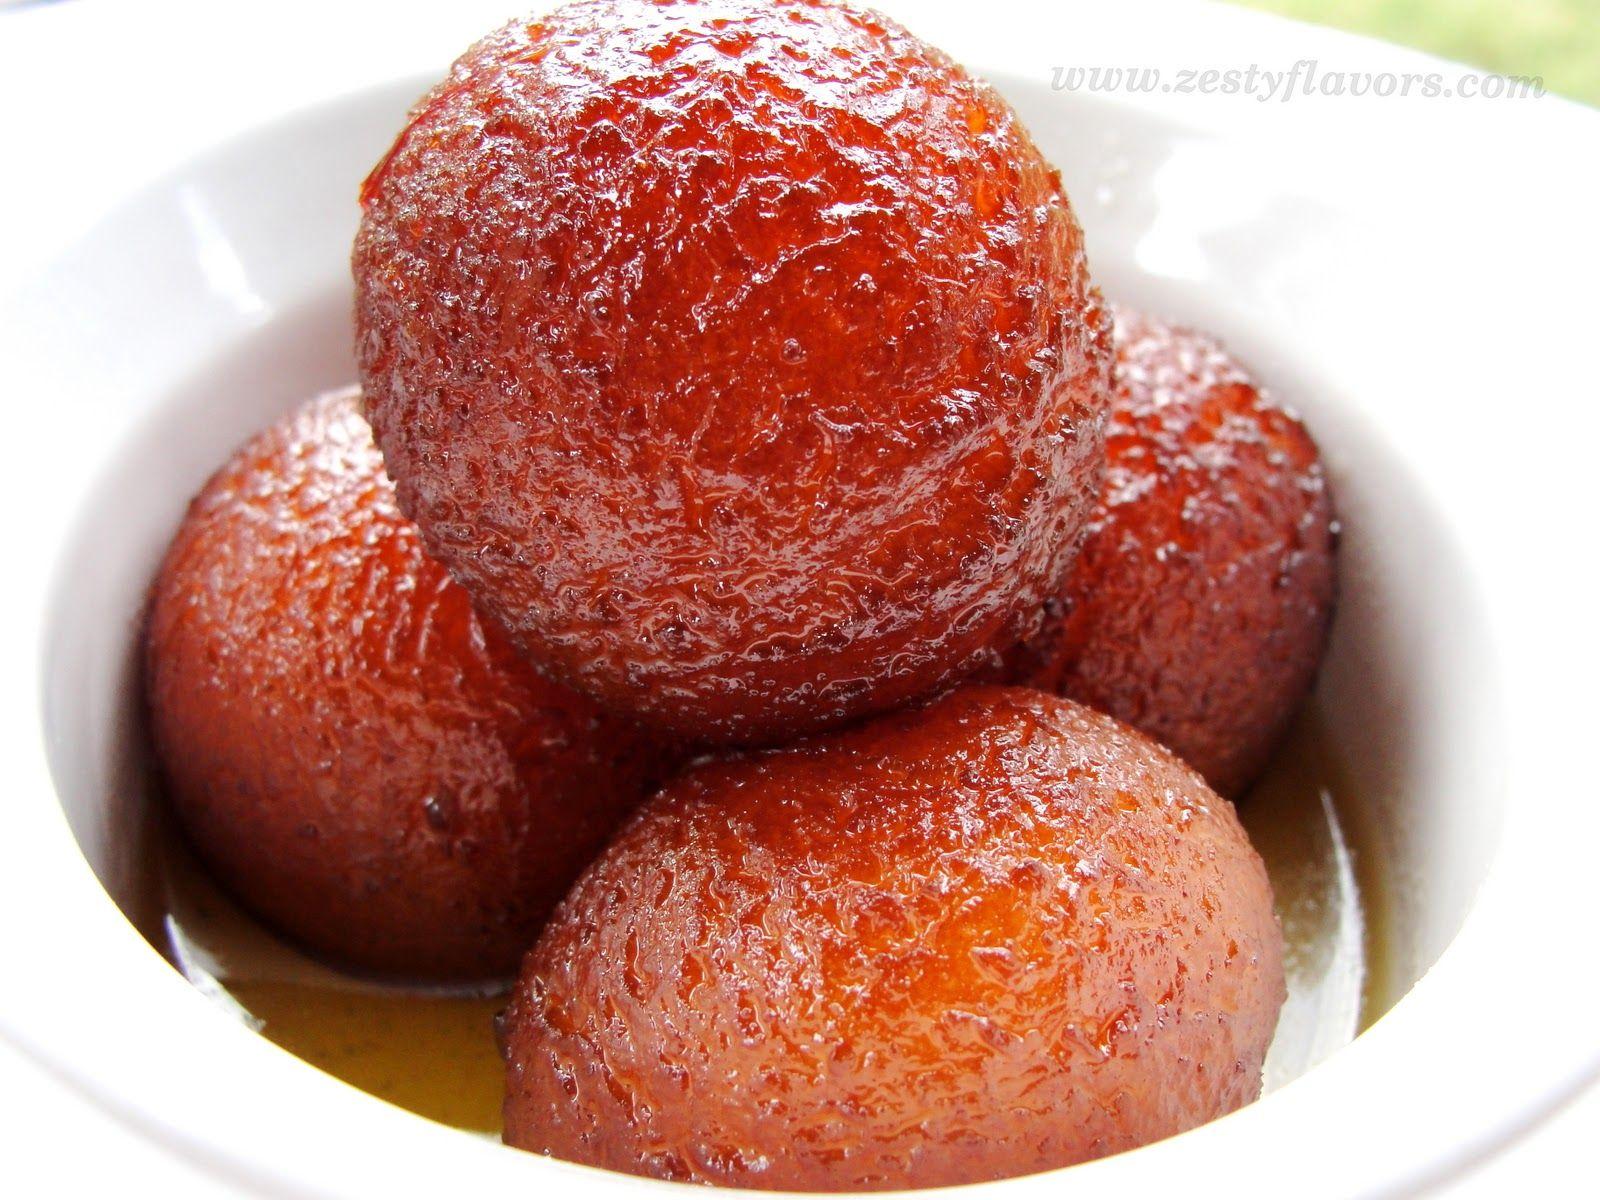 My sister has become obsessed with gulab jamun! It's on the top of